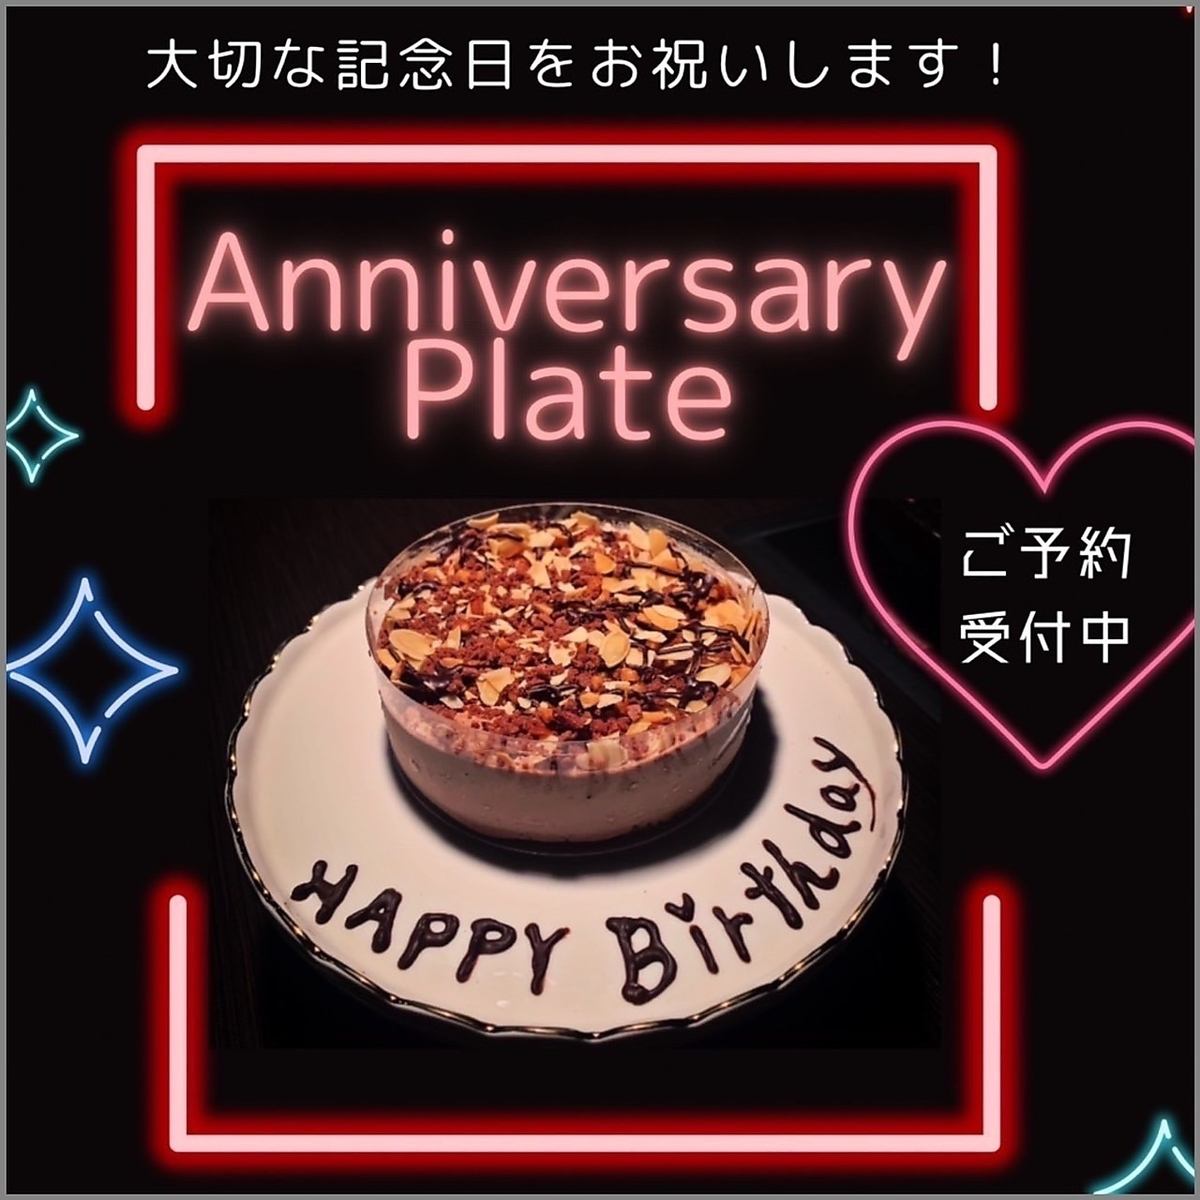 Surprise whole cake available for 1000 yen ♪ Limited to reservations until the day before!